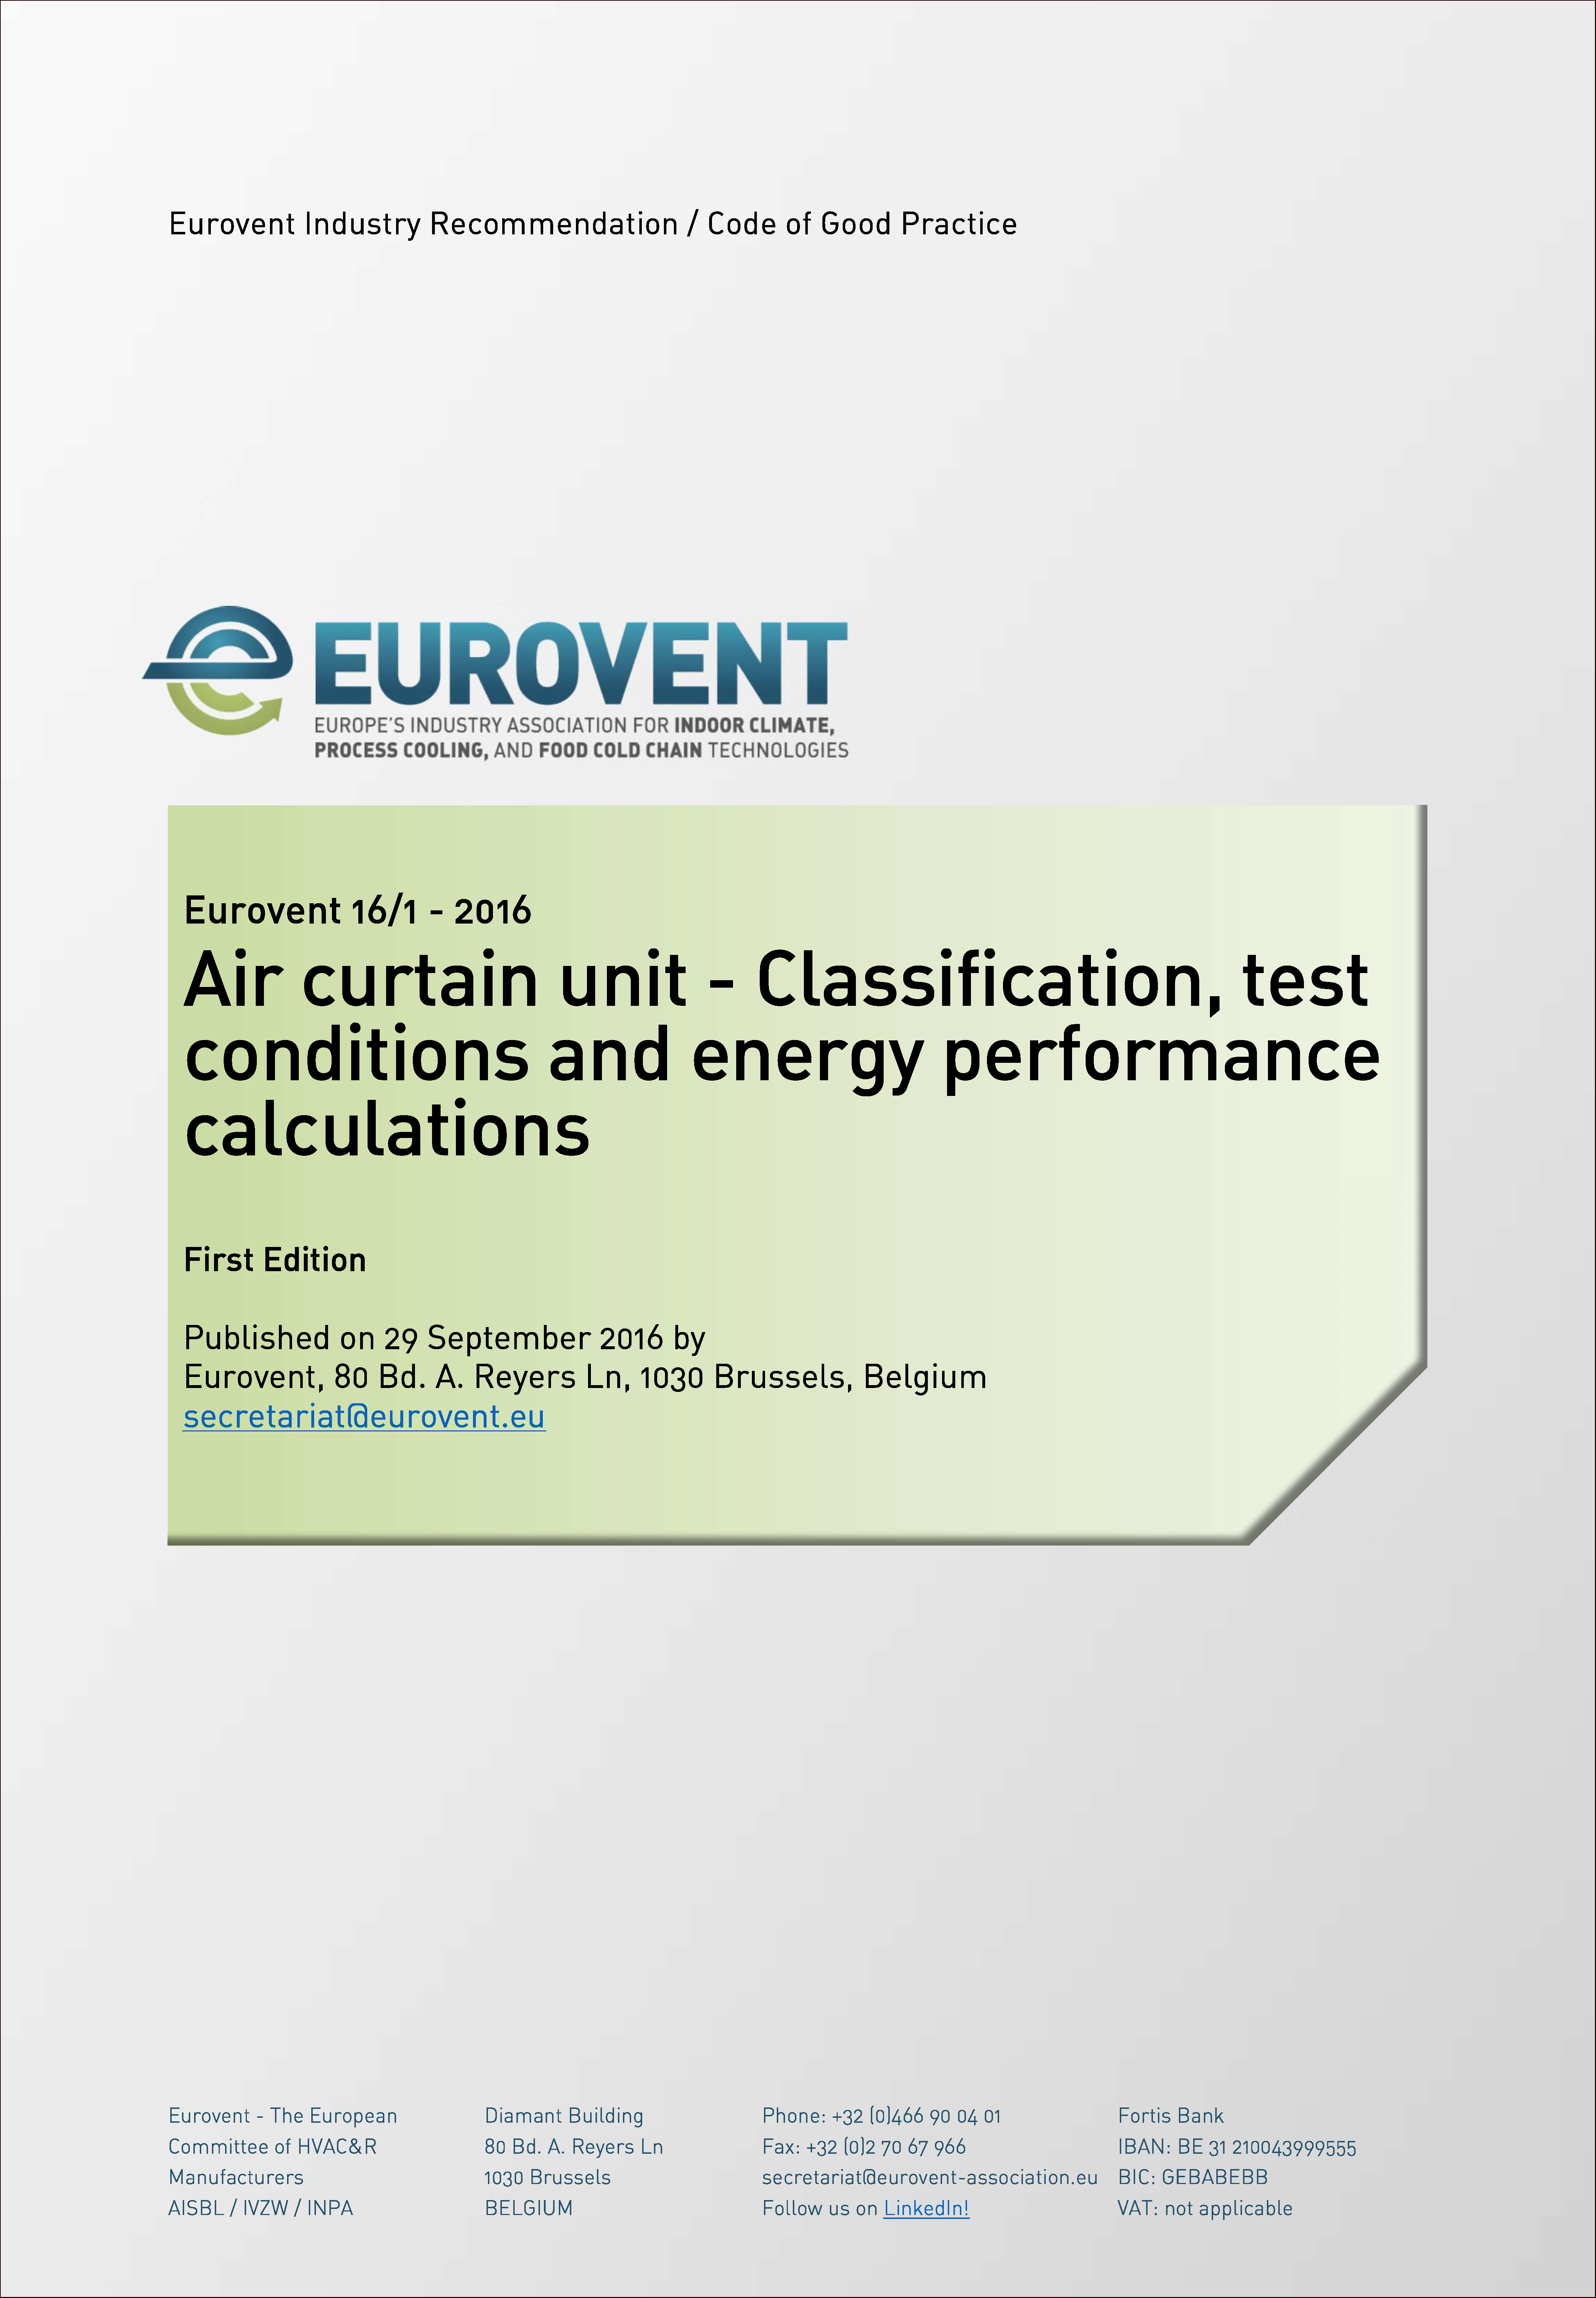 2016 - Air curtain unit - Classification, test conditions and energy performance calculations